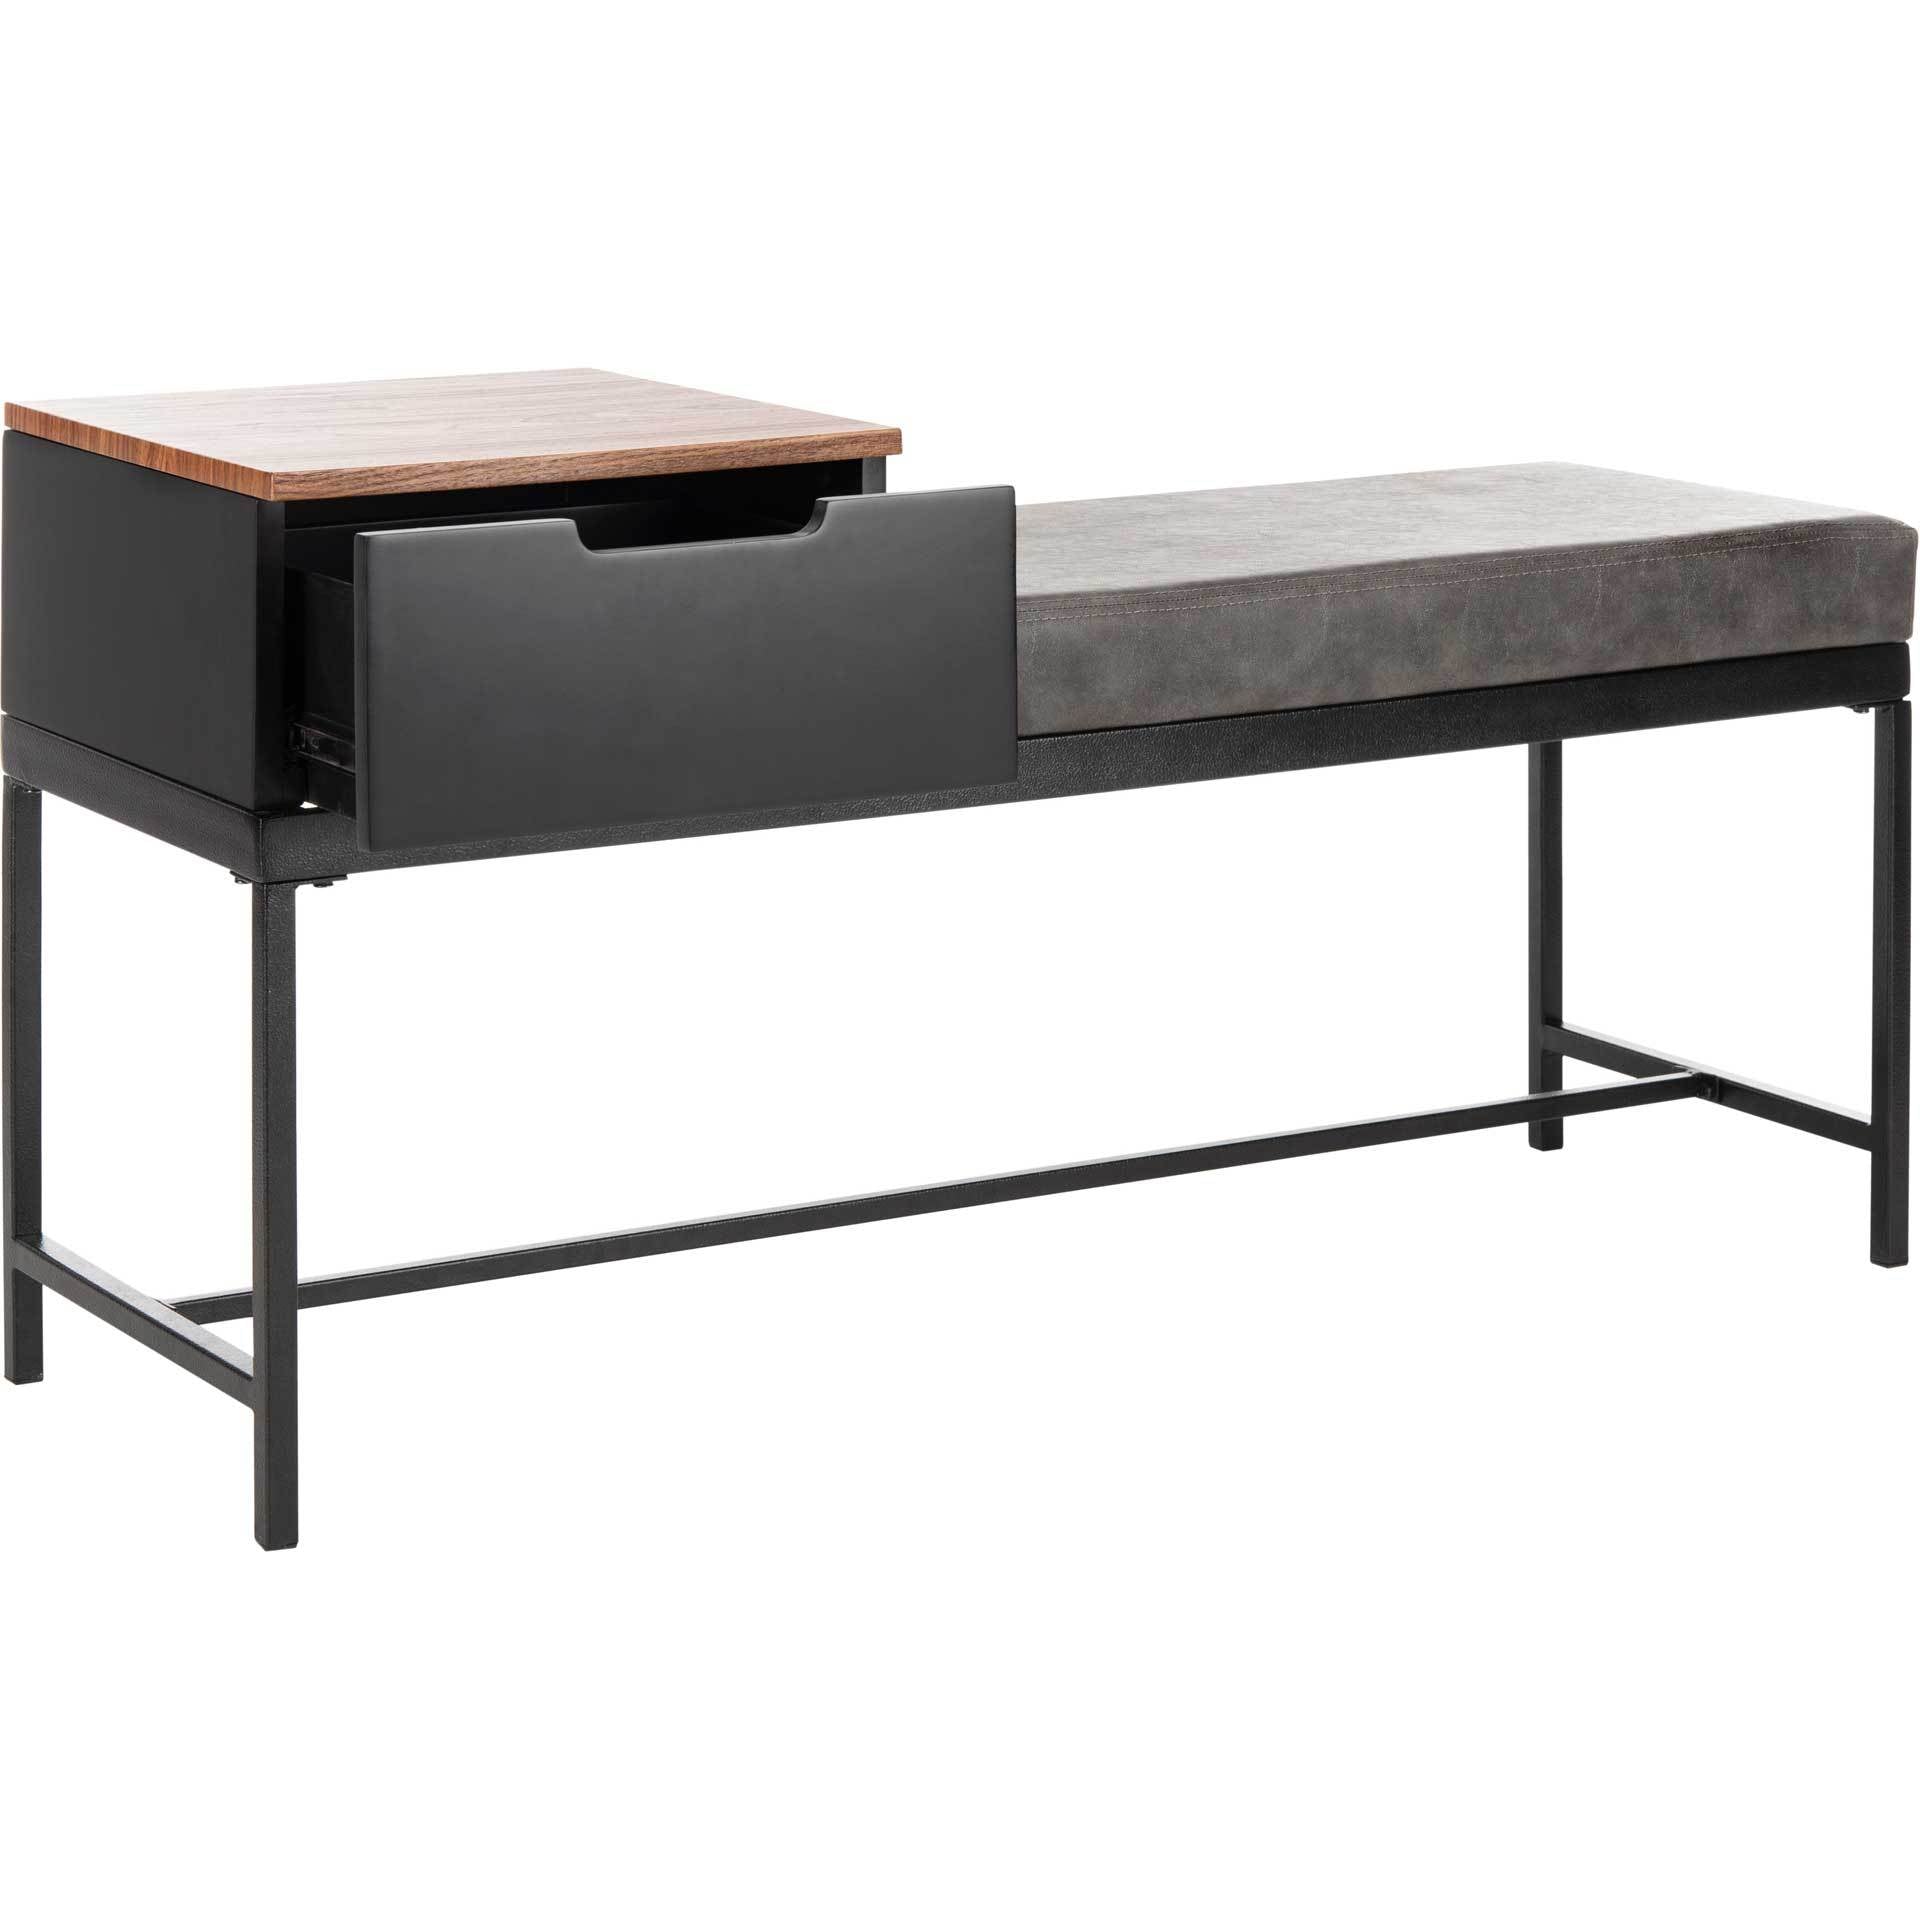 Maxton Bench With Storage Brown/Gray